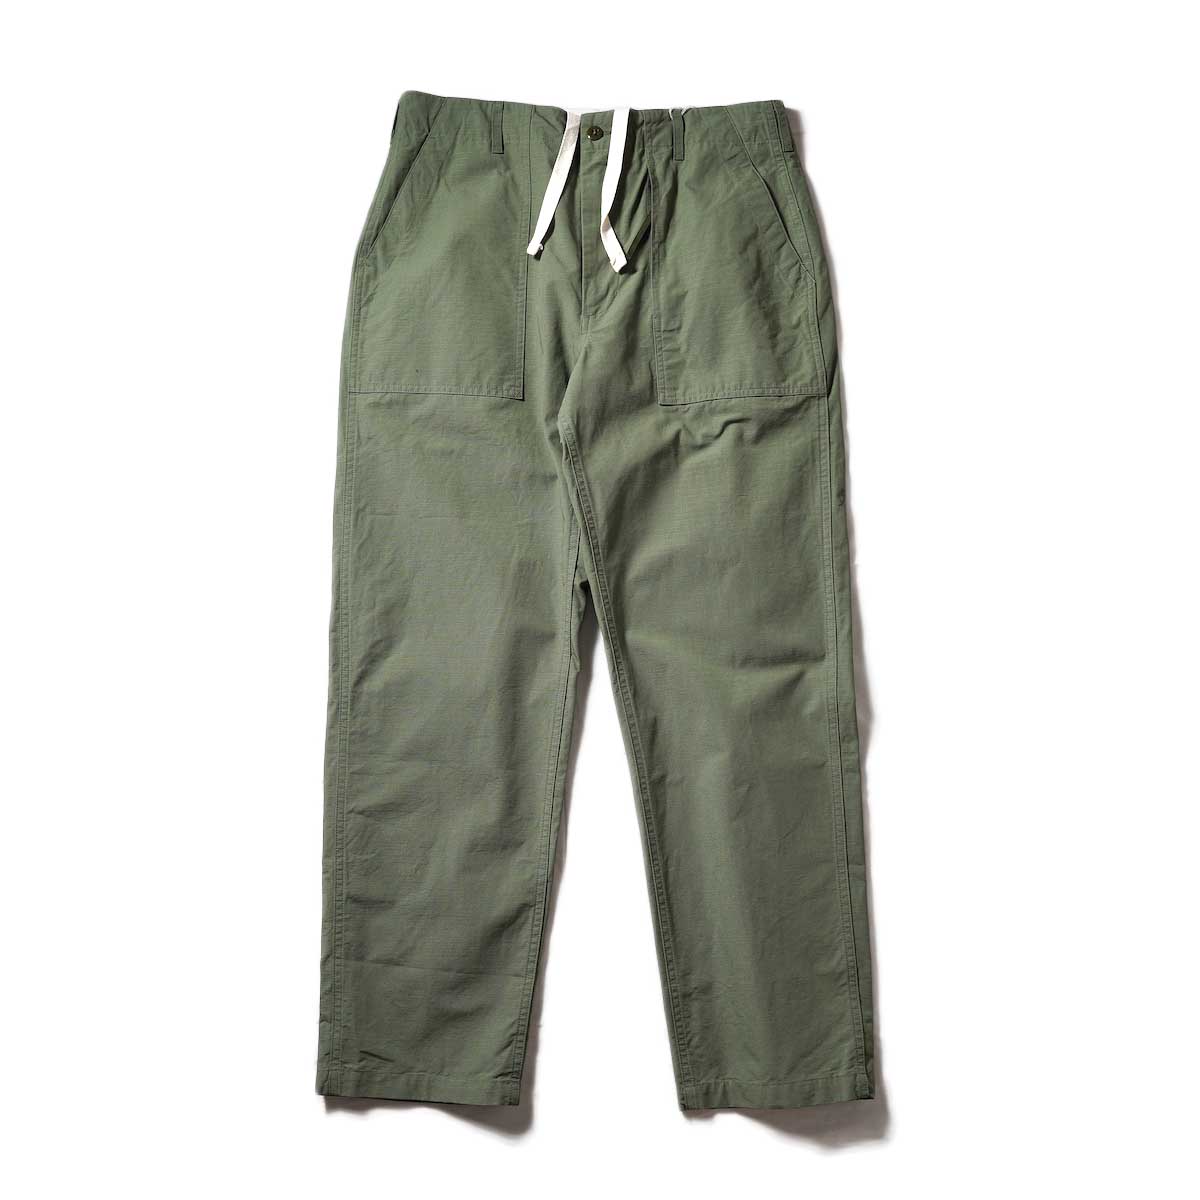 ENGINEERED GARMENTS / FATIGUE PANTS - Cotton Ripstop (Olive) 正面